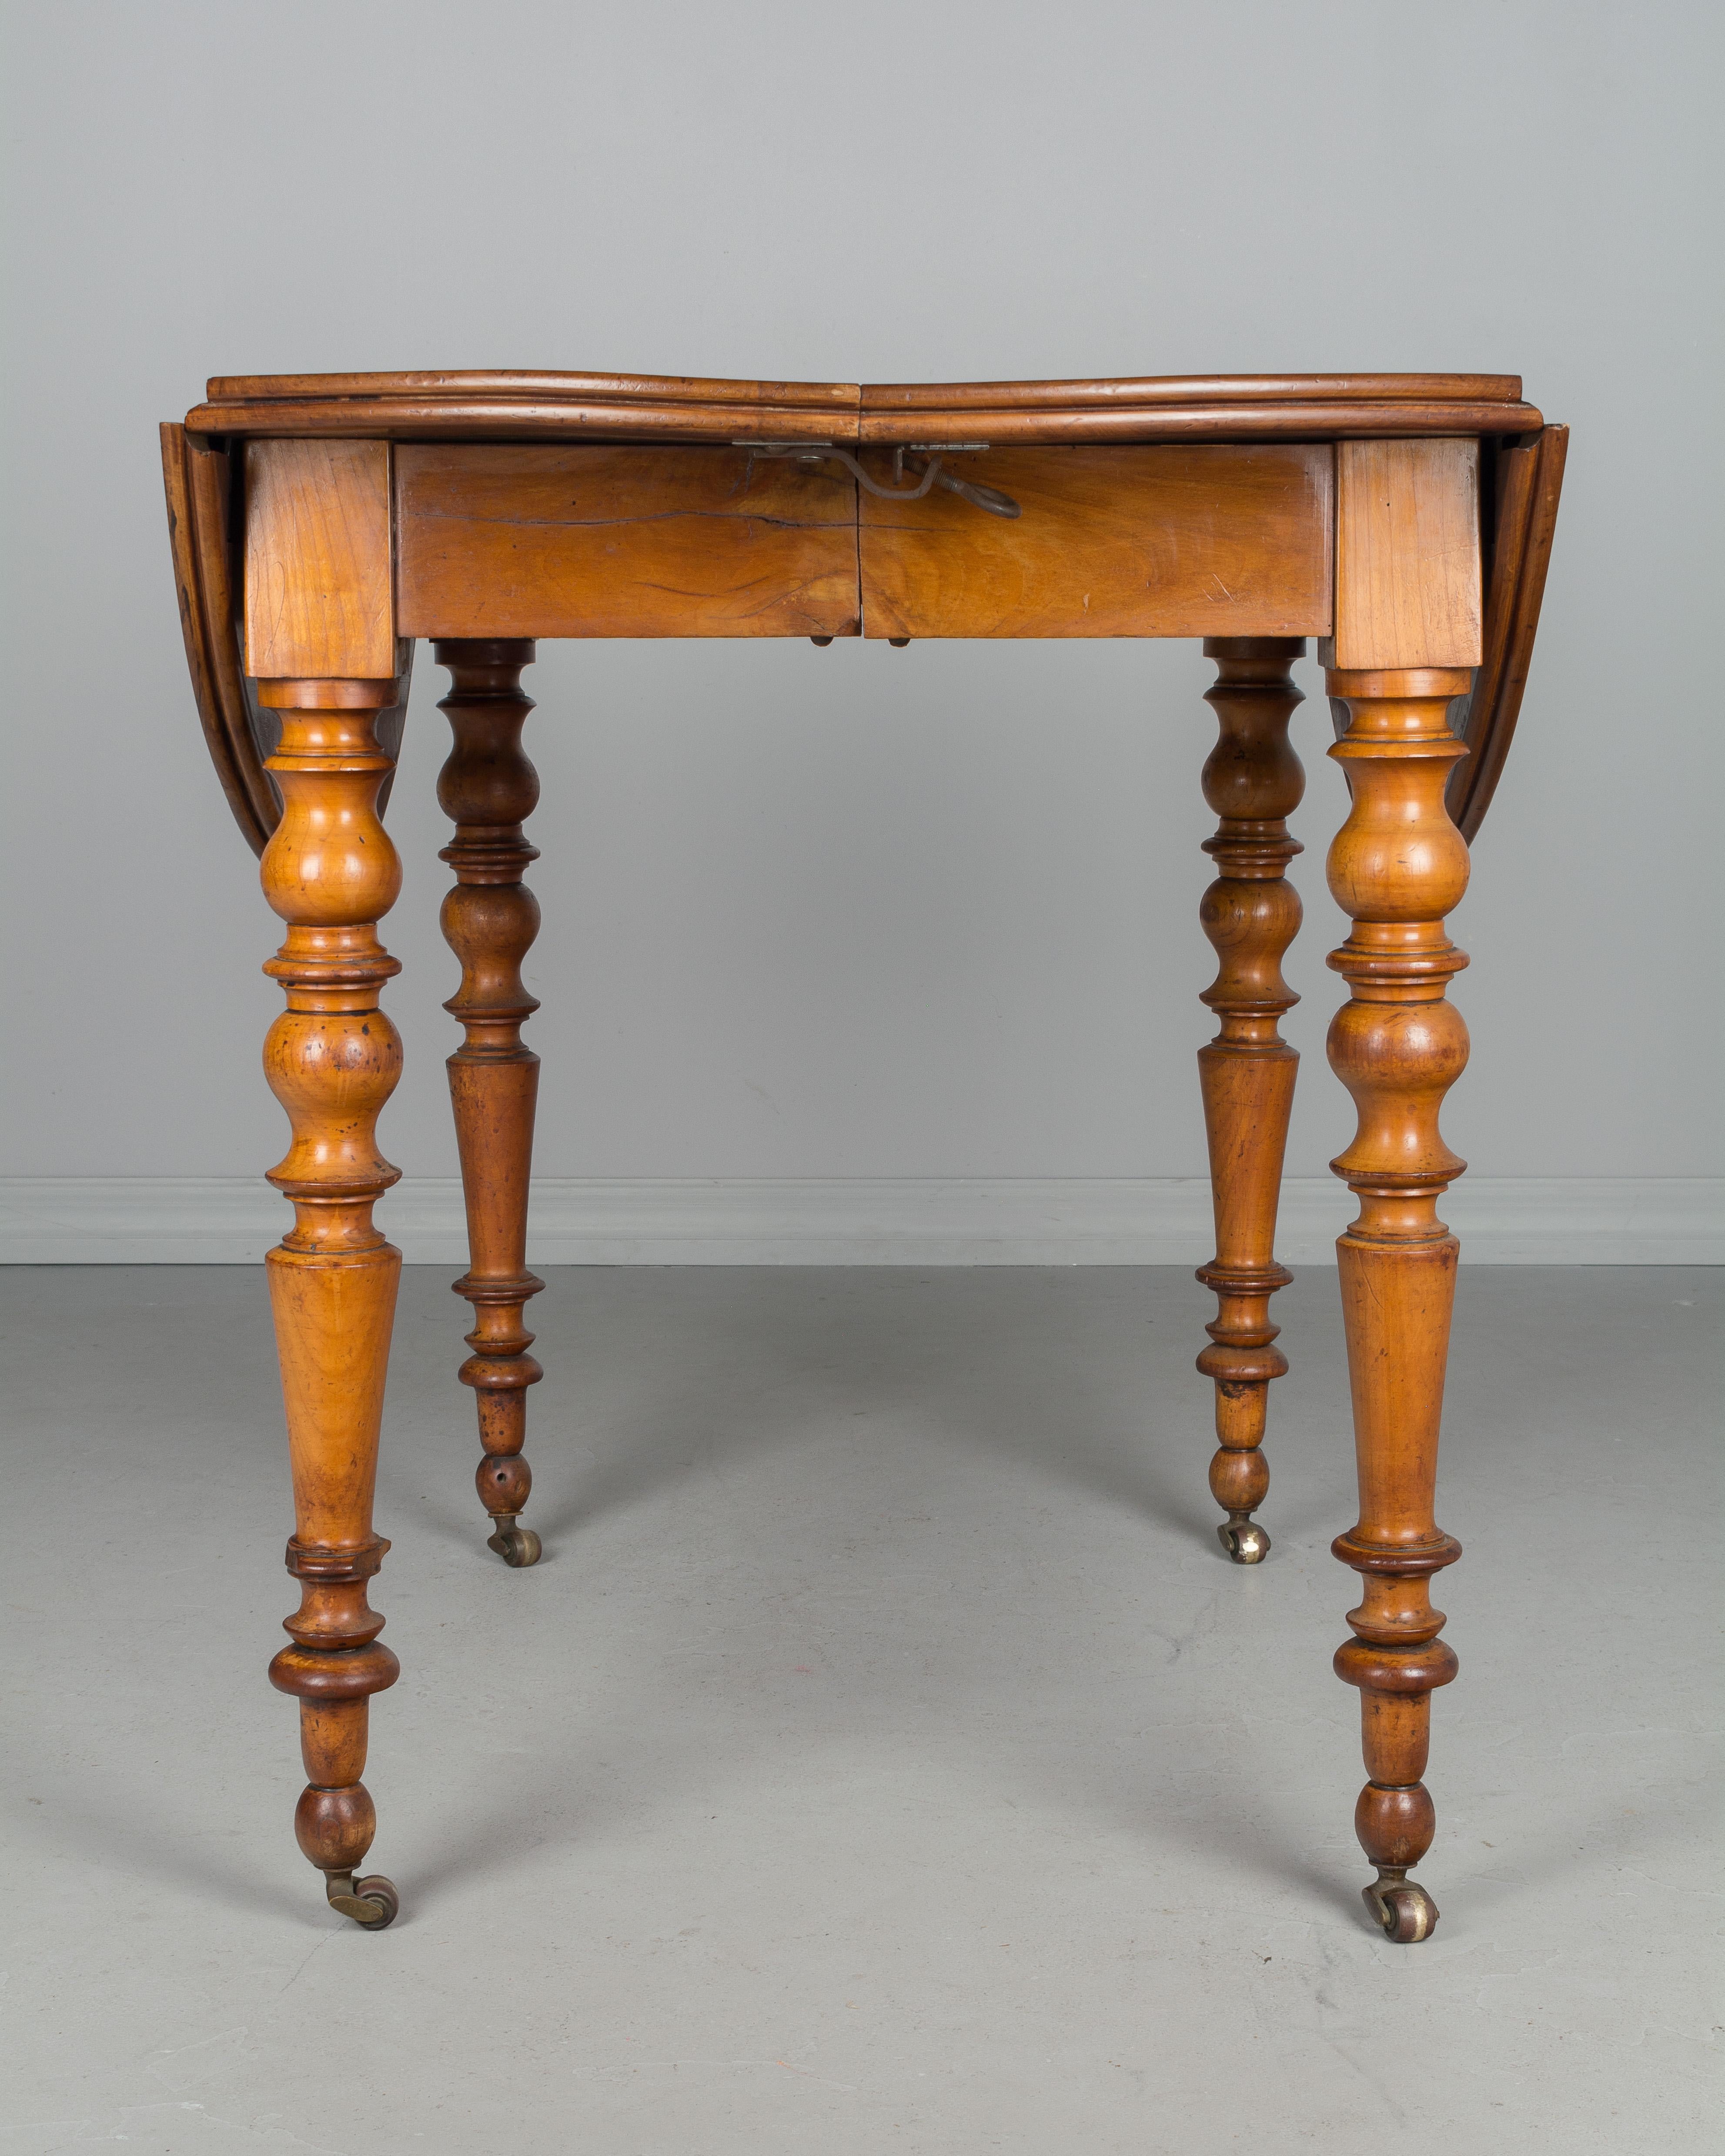 French Drop-Leaf Dining Table (Gegossen)